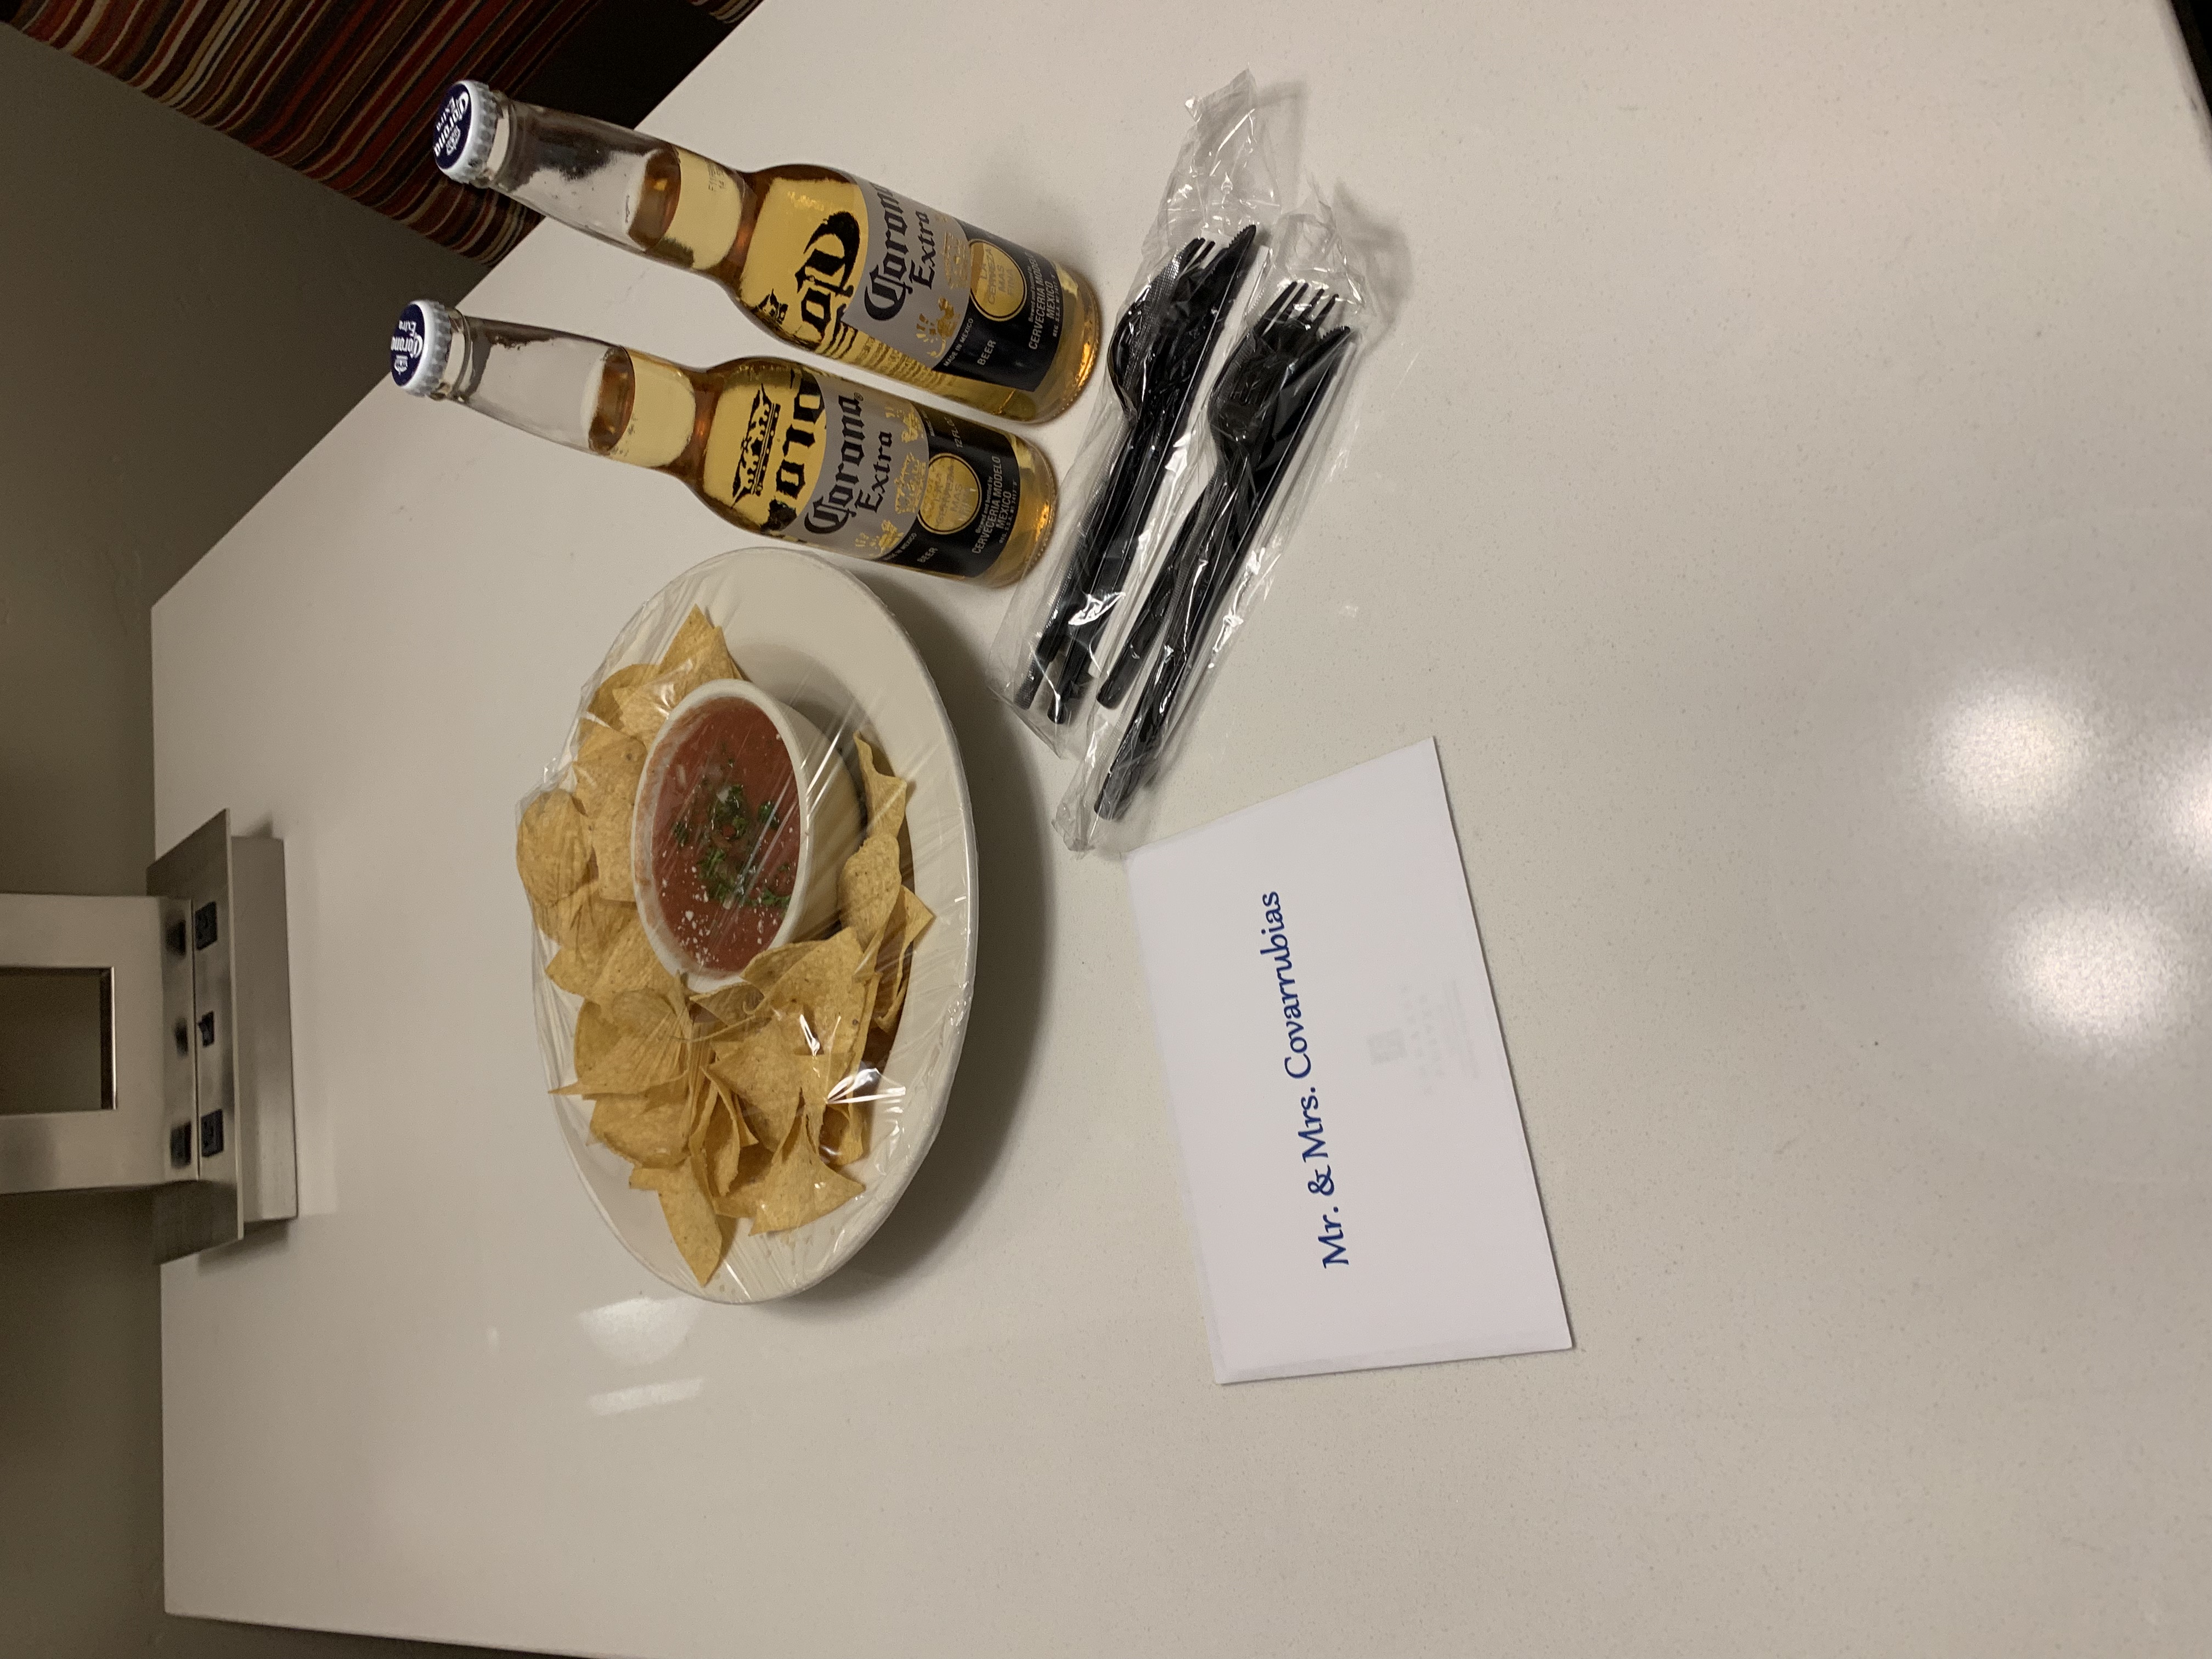 Beer with chips and salsa